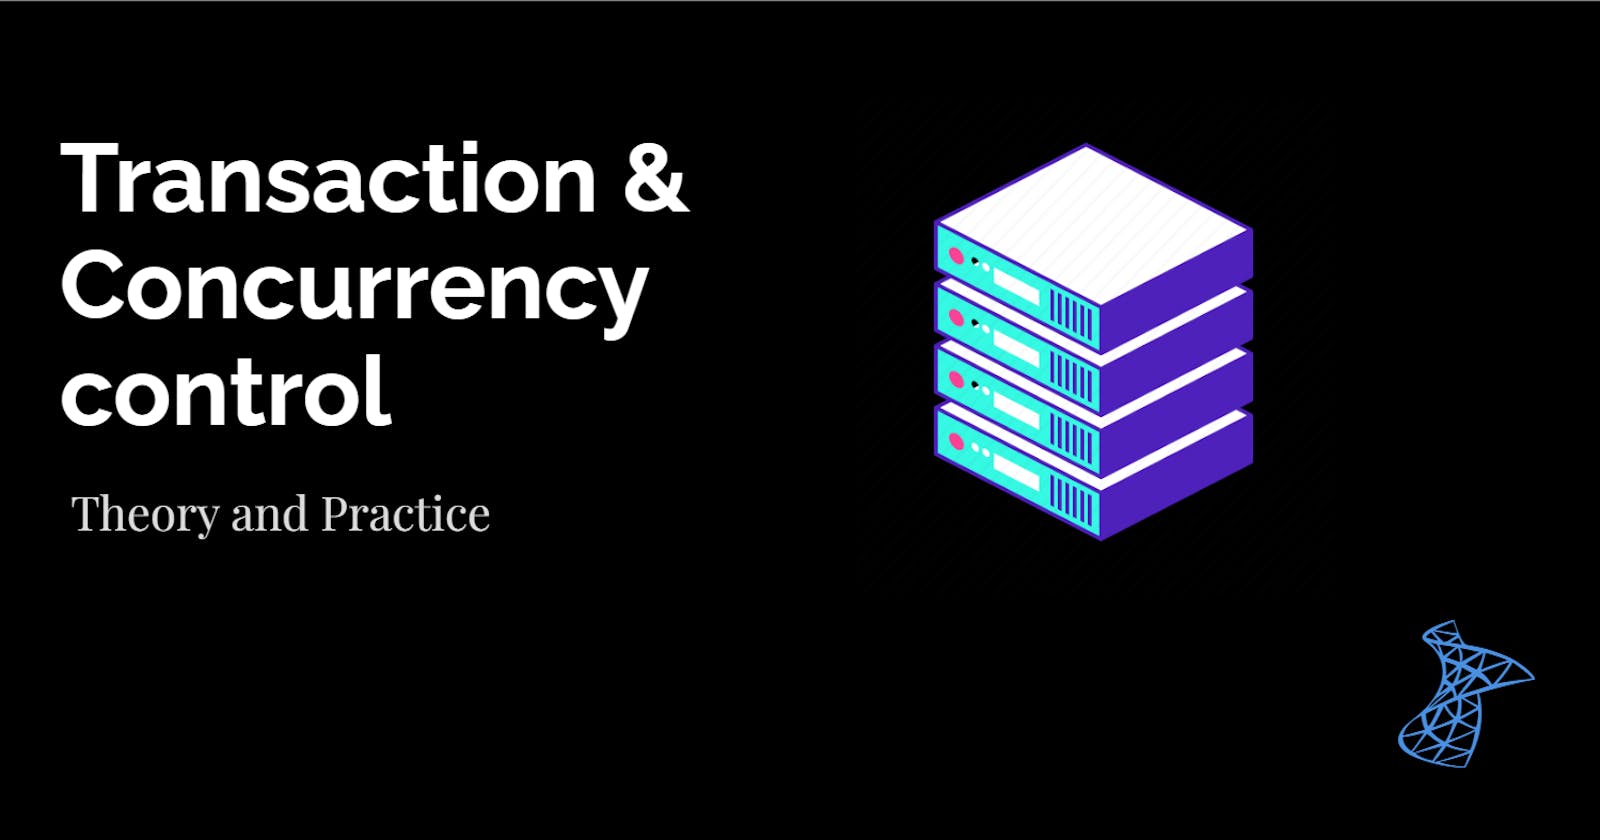 Transactions & Concurrency control - Theory and Practice!